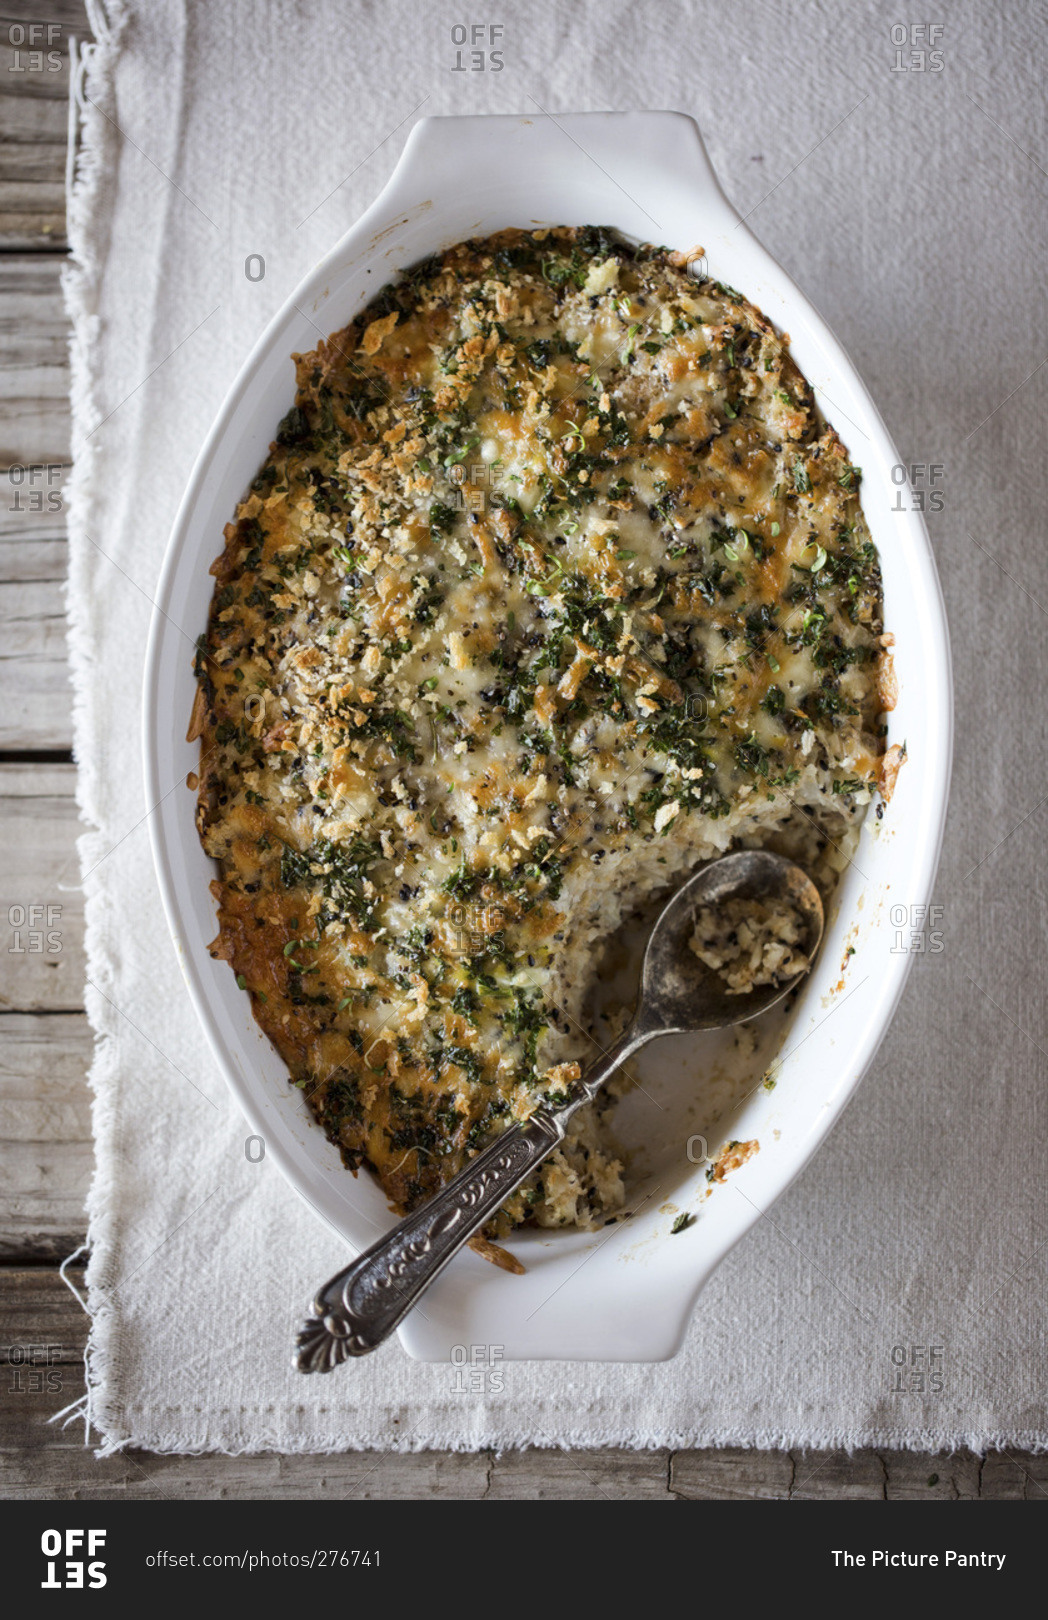 Spicy cauliflower gratin dish with crunchy topping